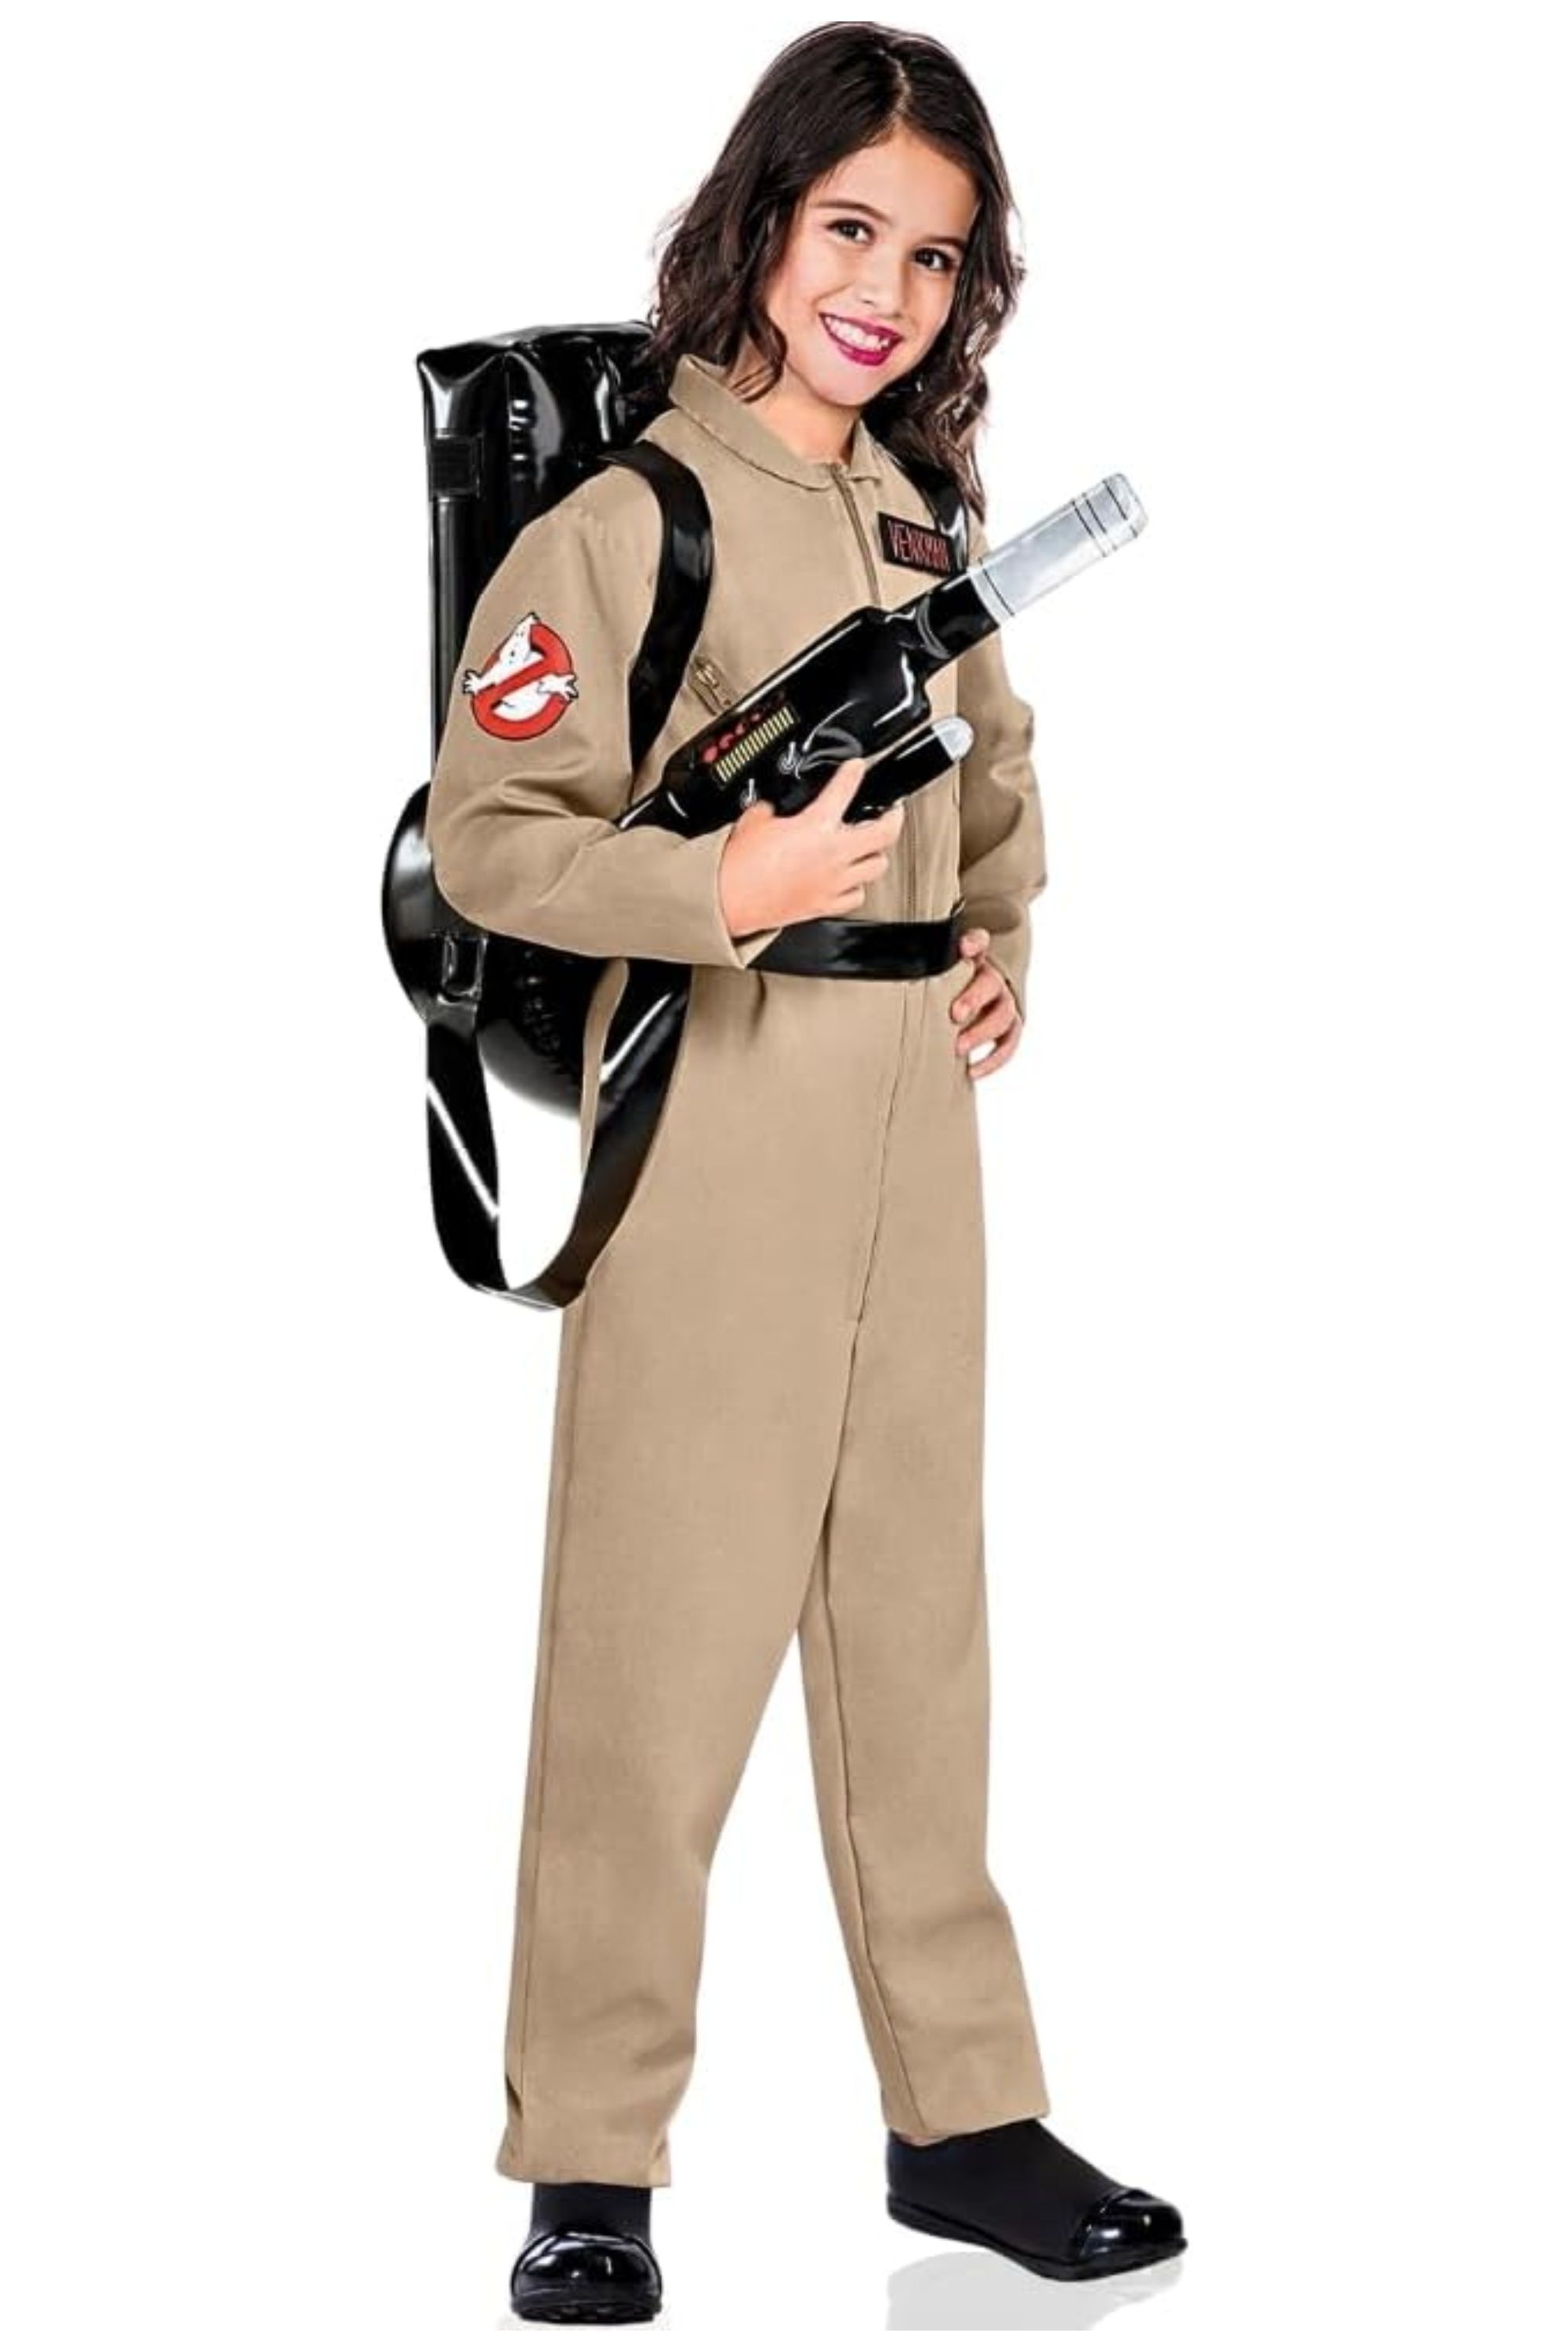 girl wearing a ghostbusters costume